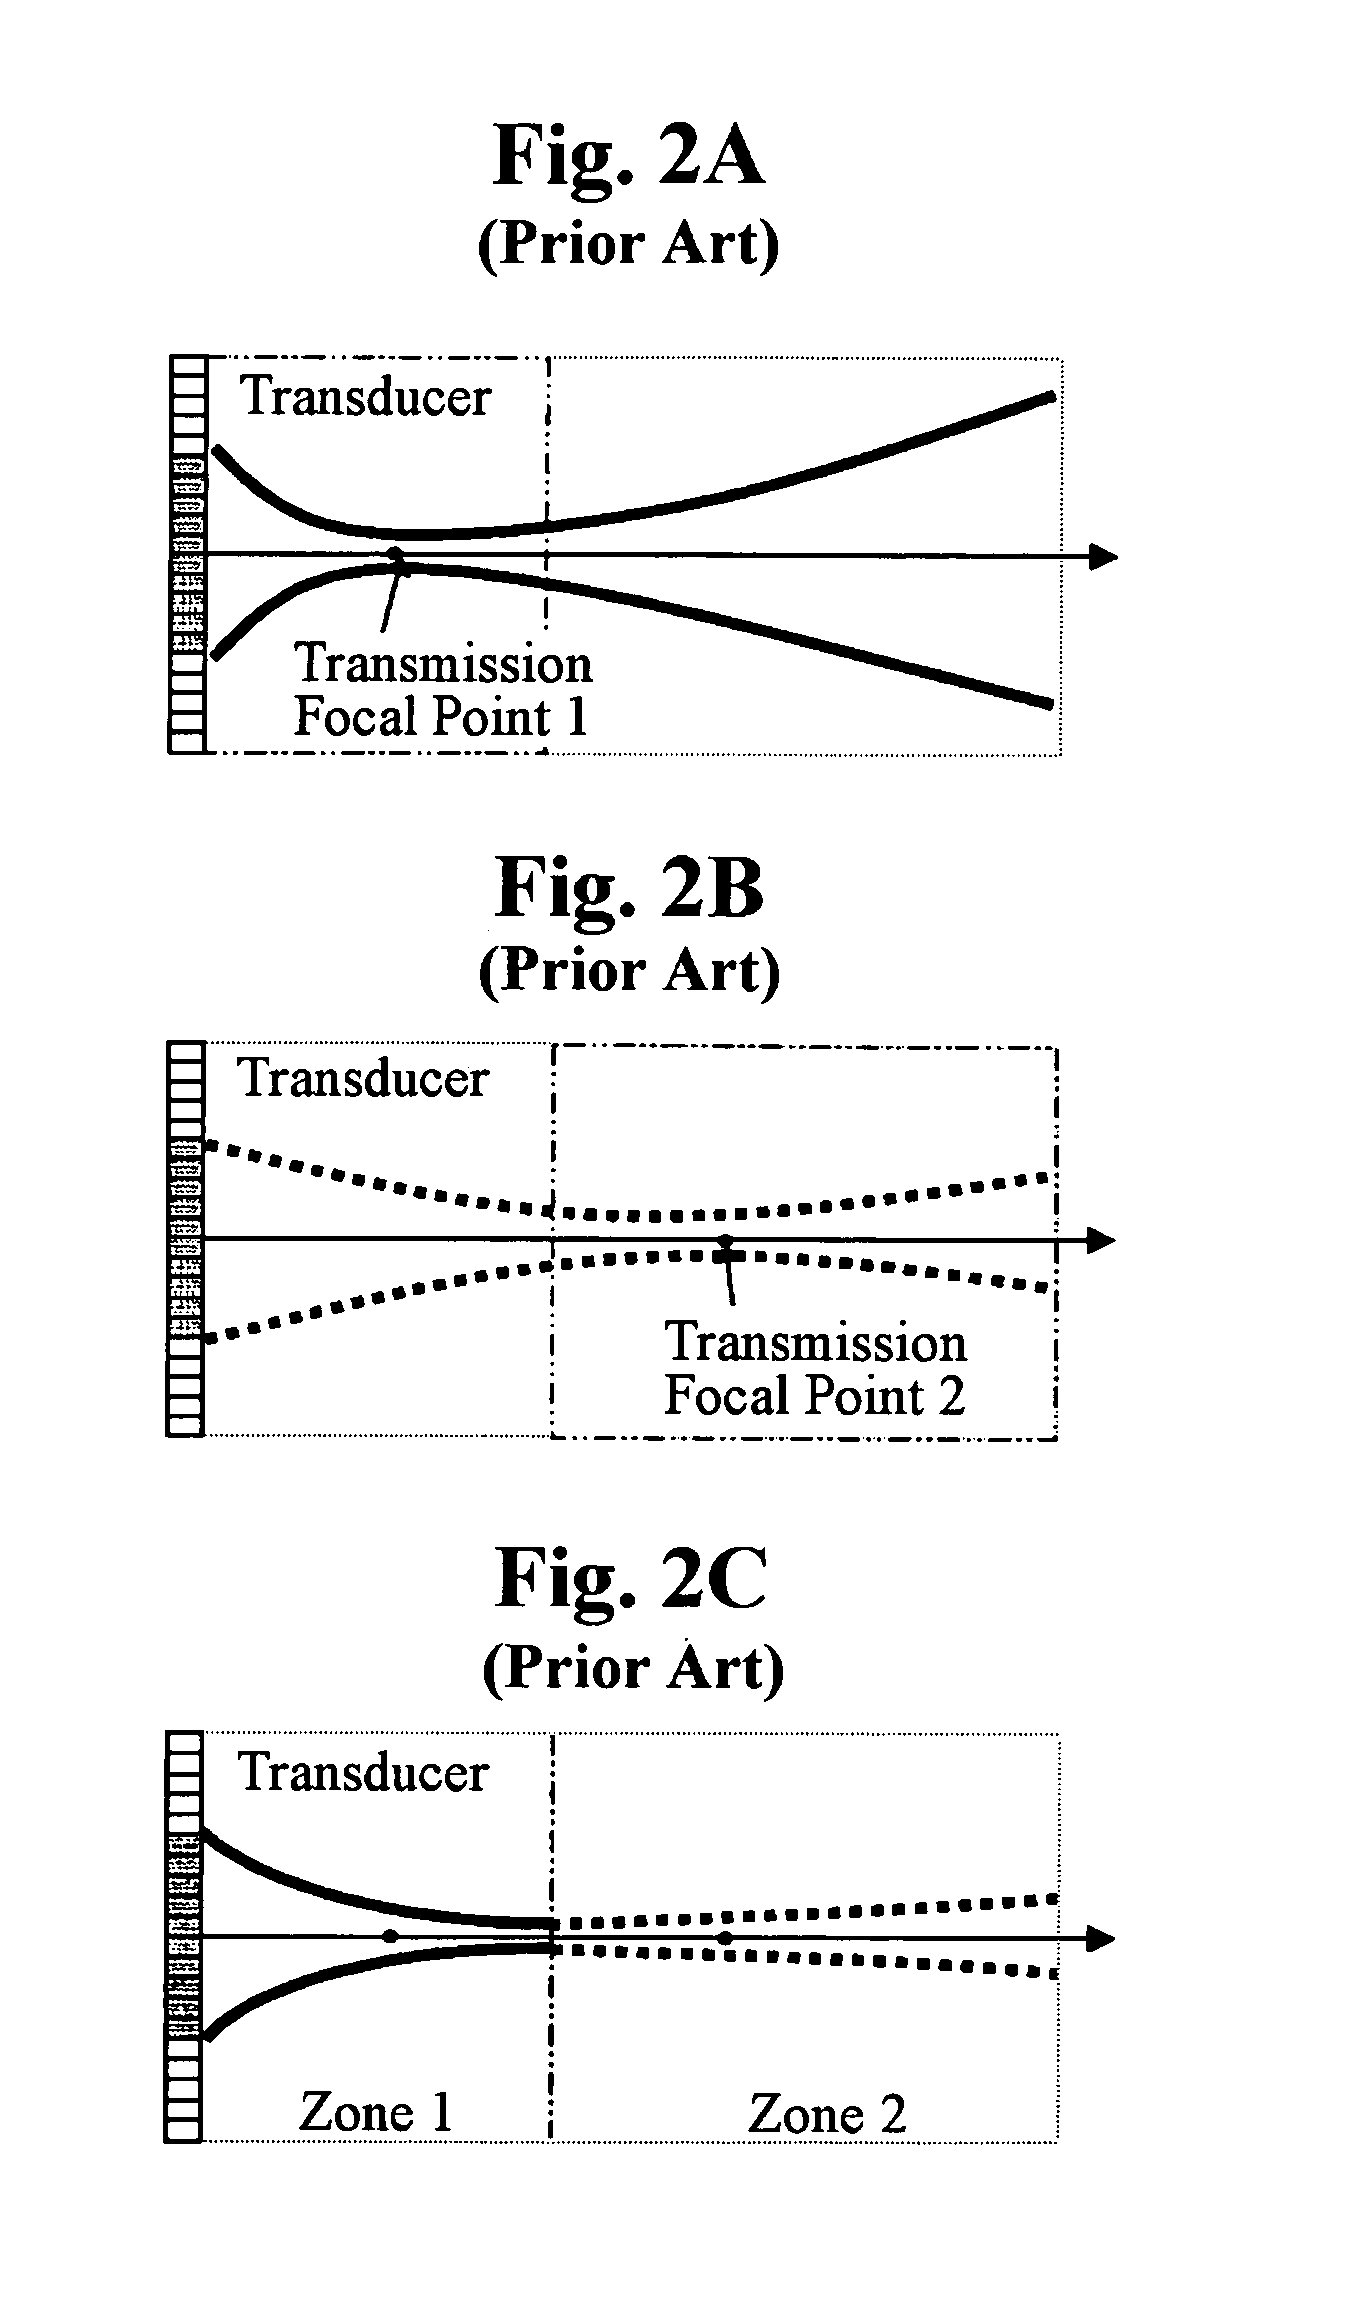 Ultrasound imaging system and method based on simultaneous multiple transmit-focusing using weighted orthogonal chirp signals